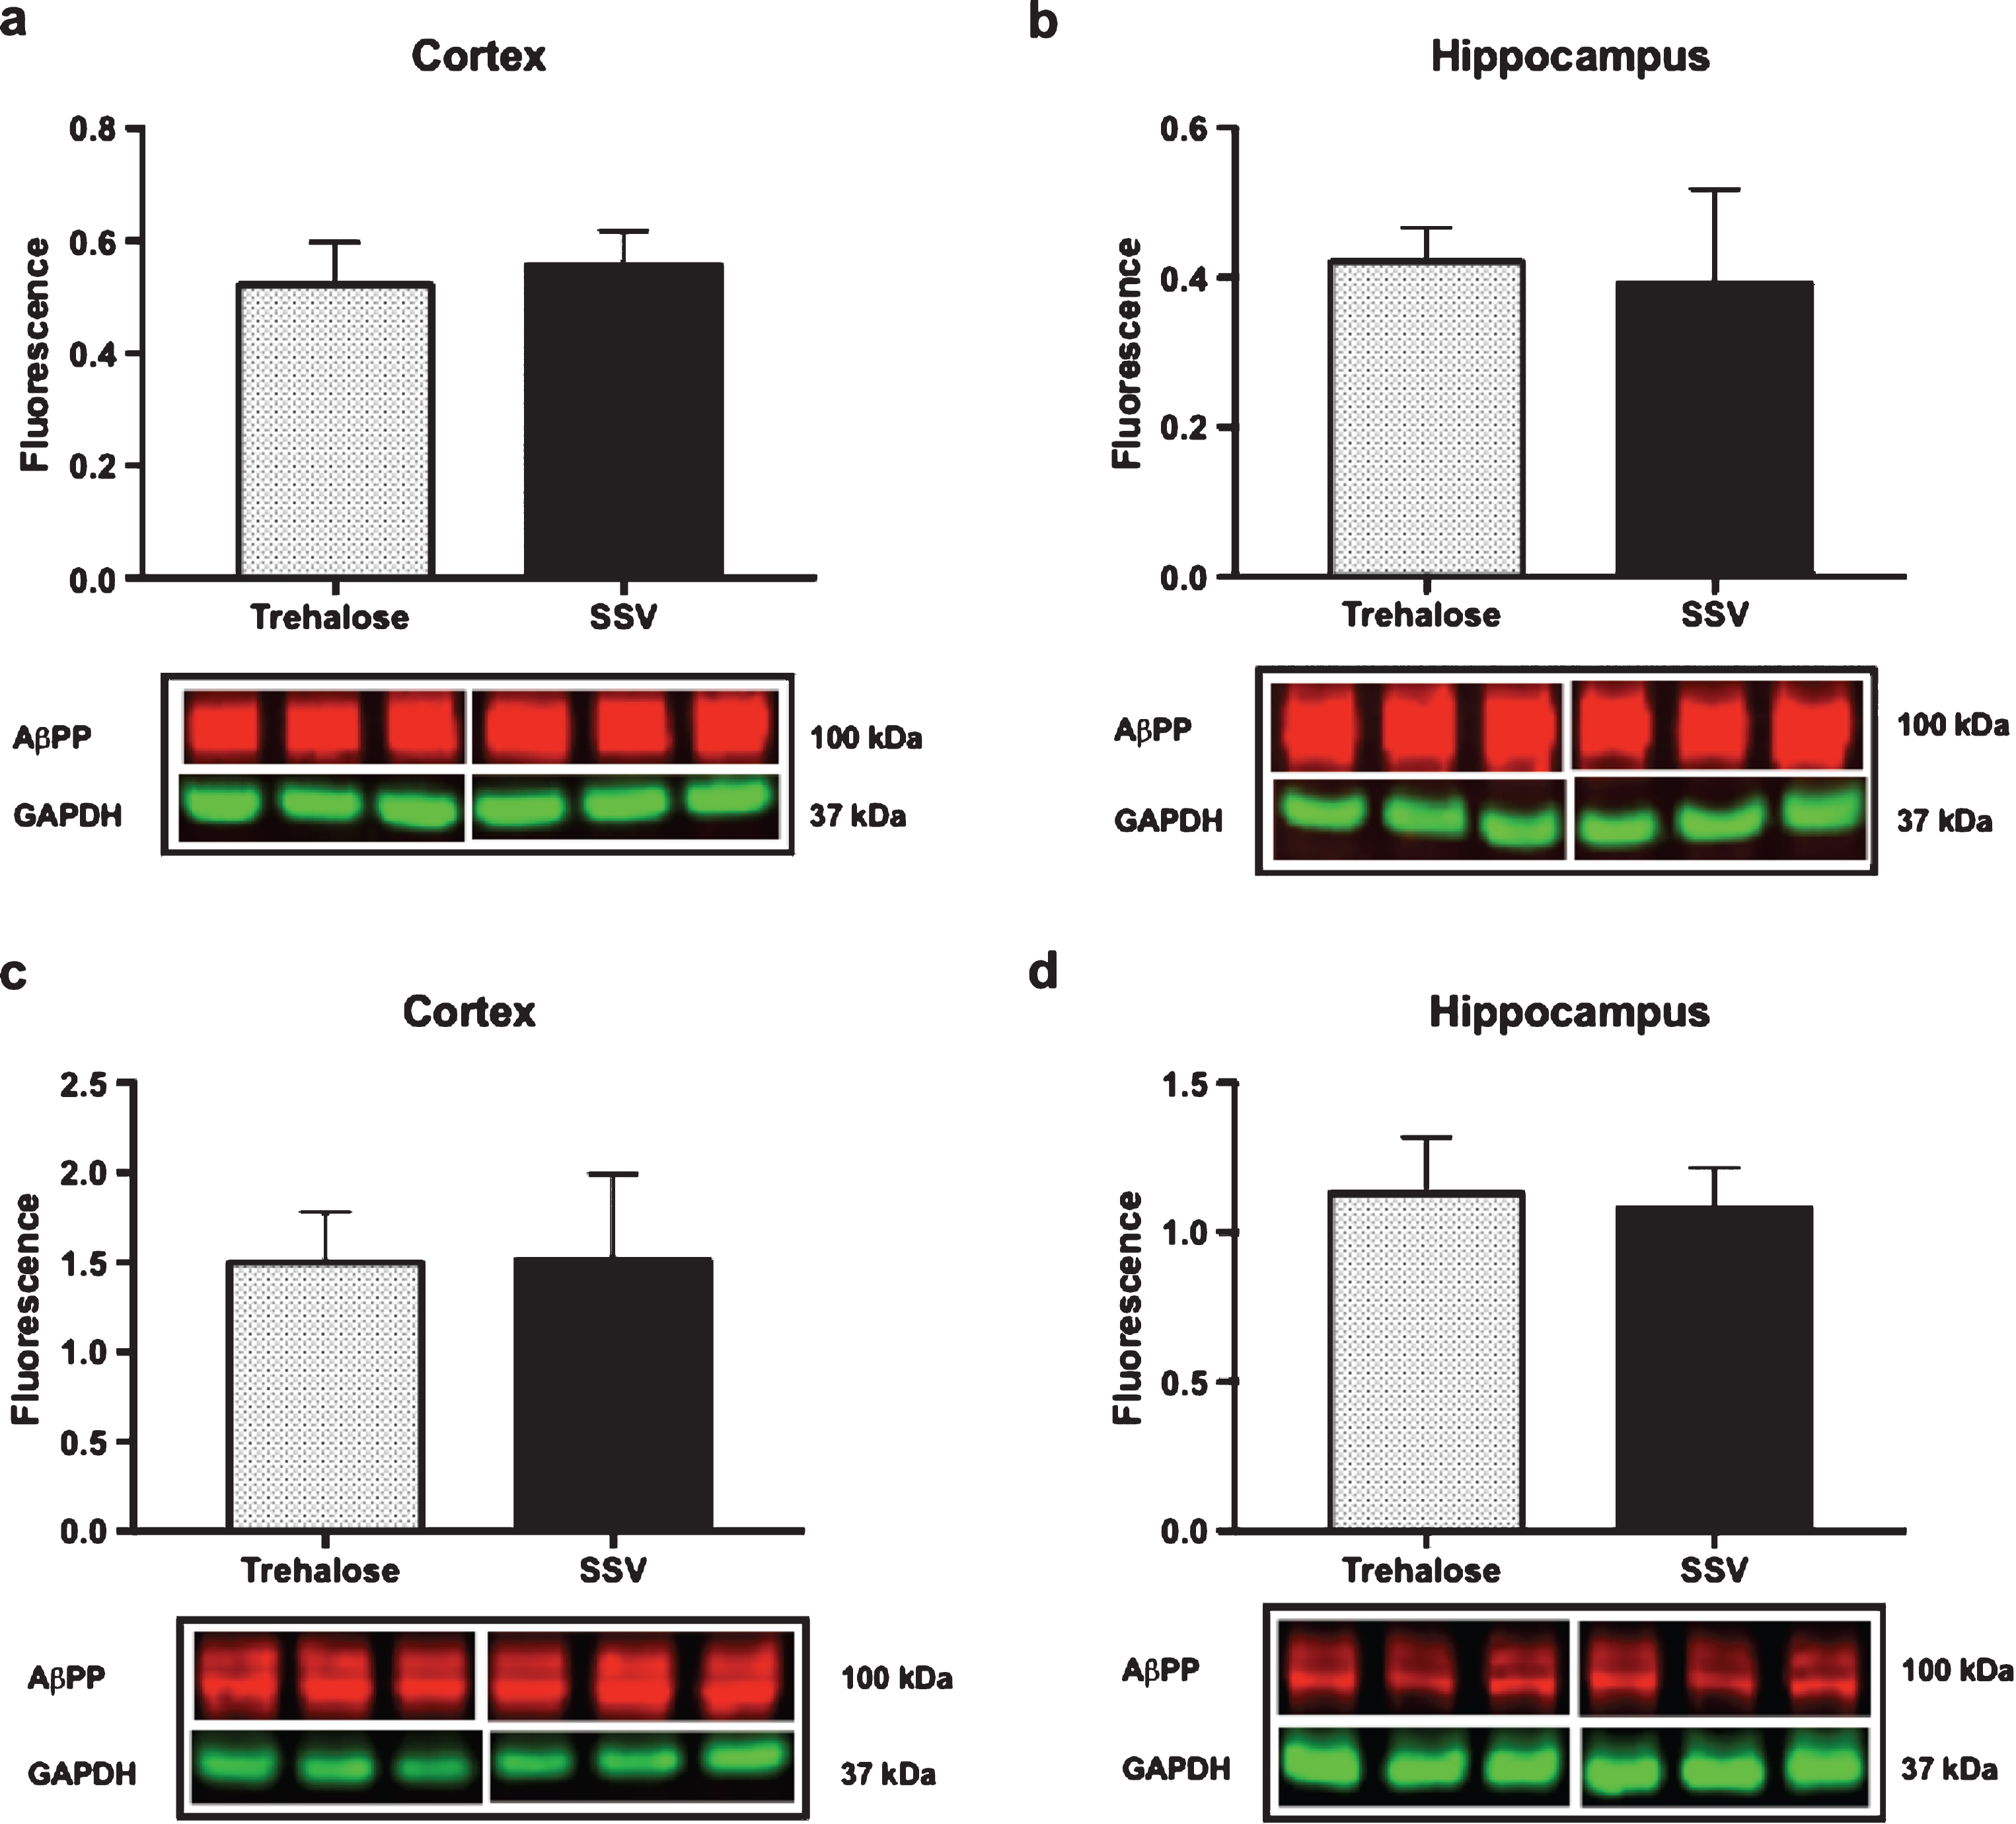 Trehalose does not alter AβPP expression. Trehalose did not significantly alter the expression of AβPP in the soluble fraction of cortex (a) or hippocampus (b), nor in the membrane fraction of cortex (c) or hippocampus (d).